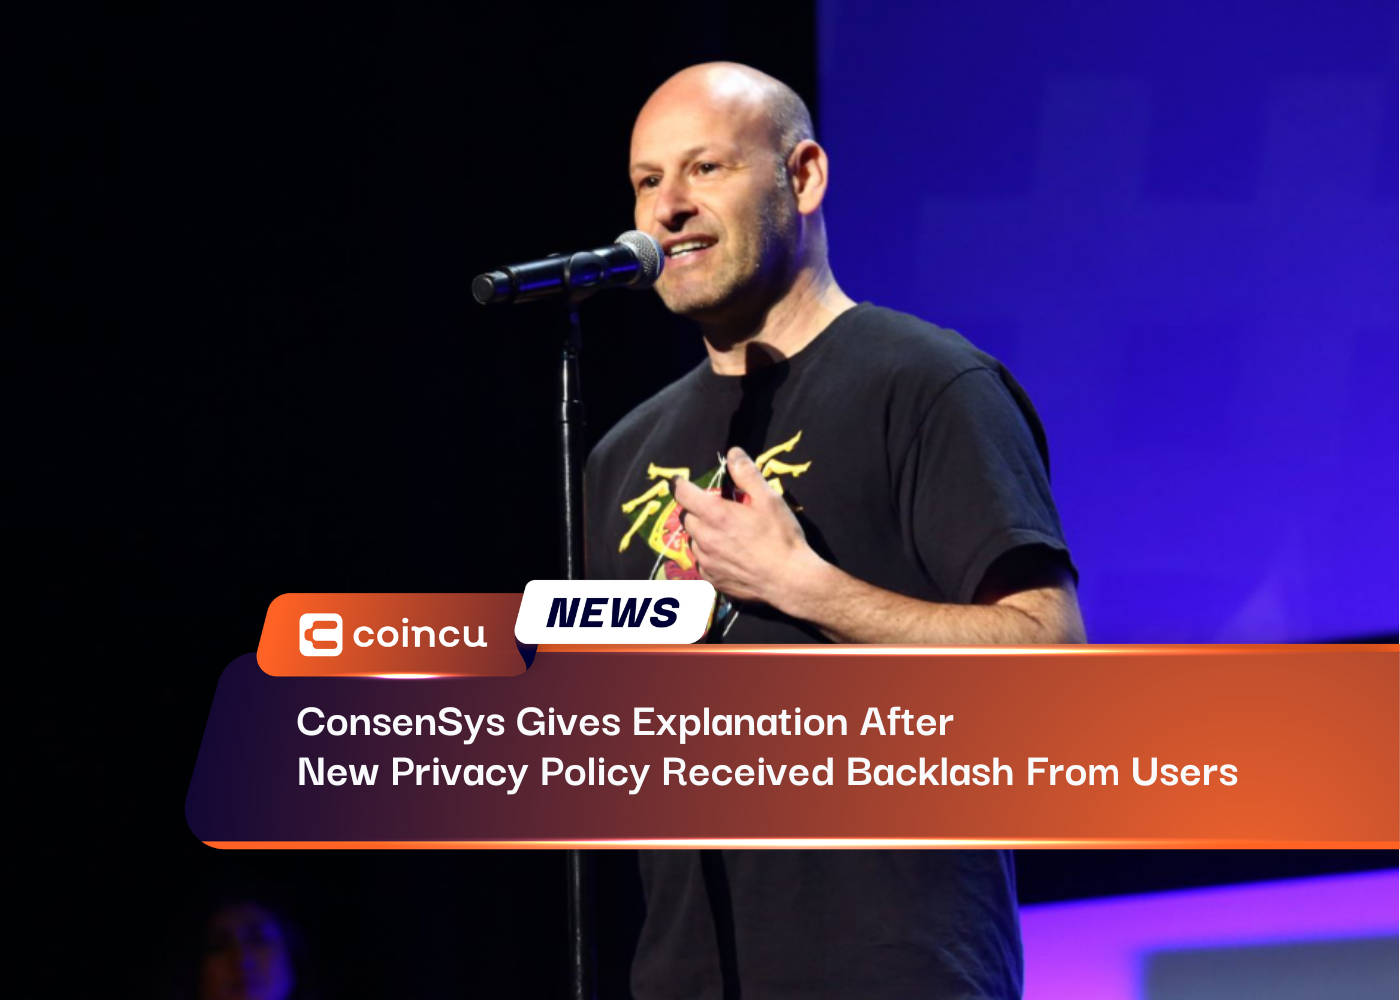 ConsenSys Gives Explanation After New Privacy Policy Received Backlash From Users